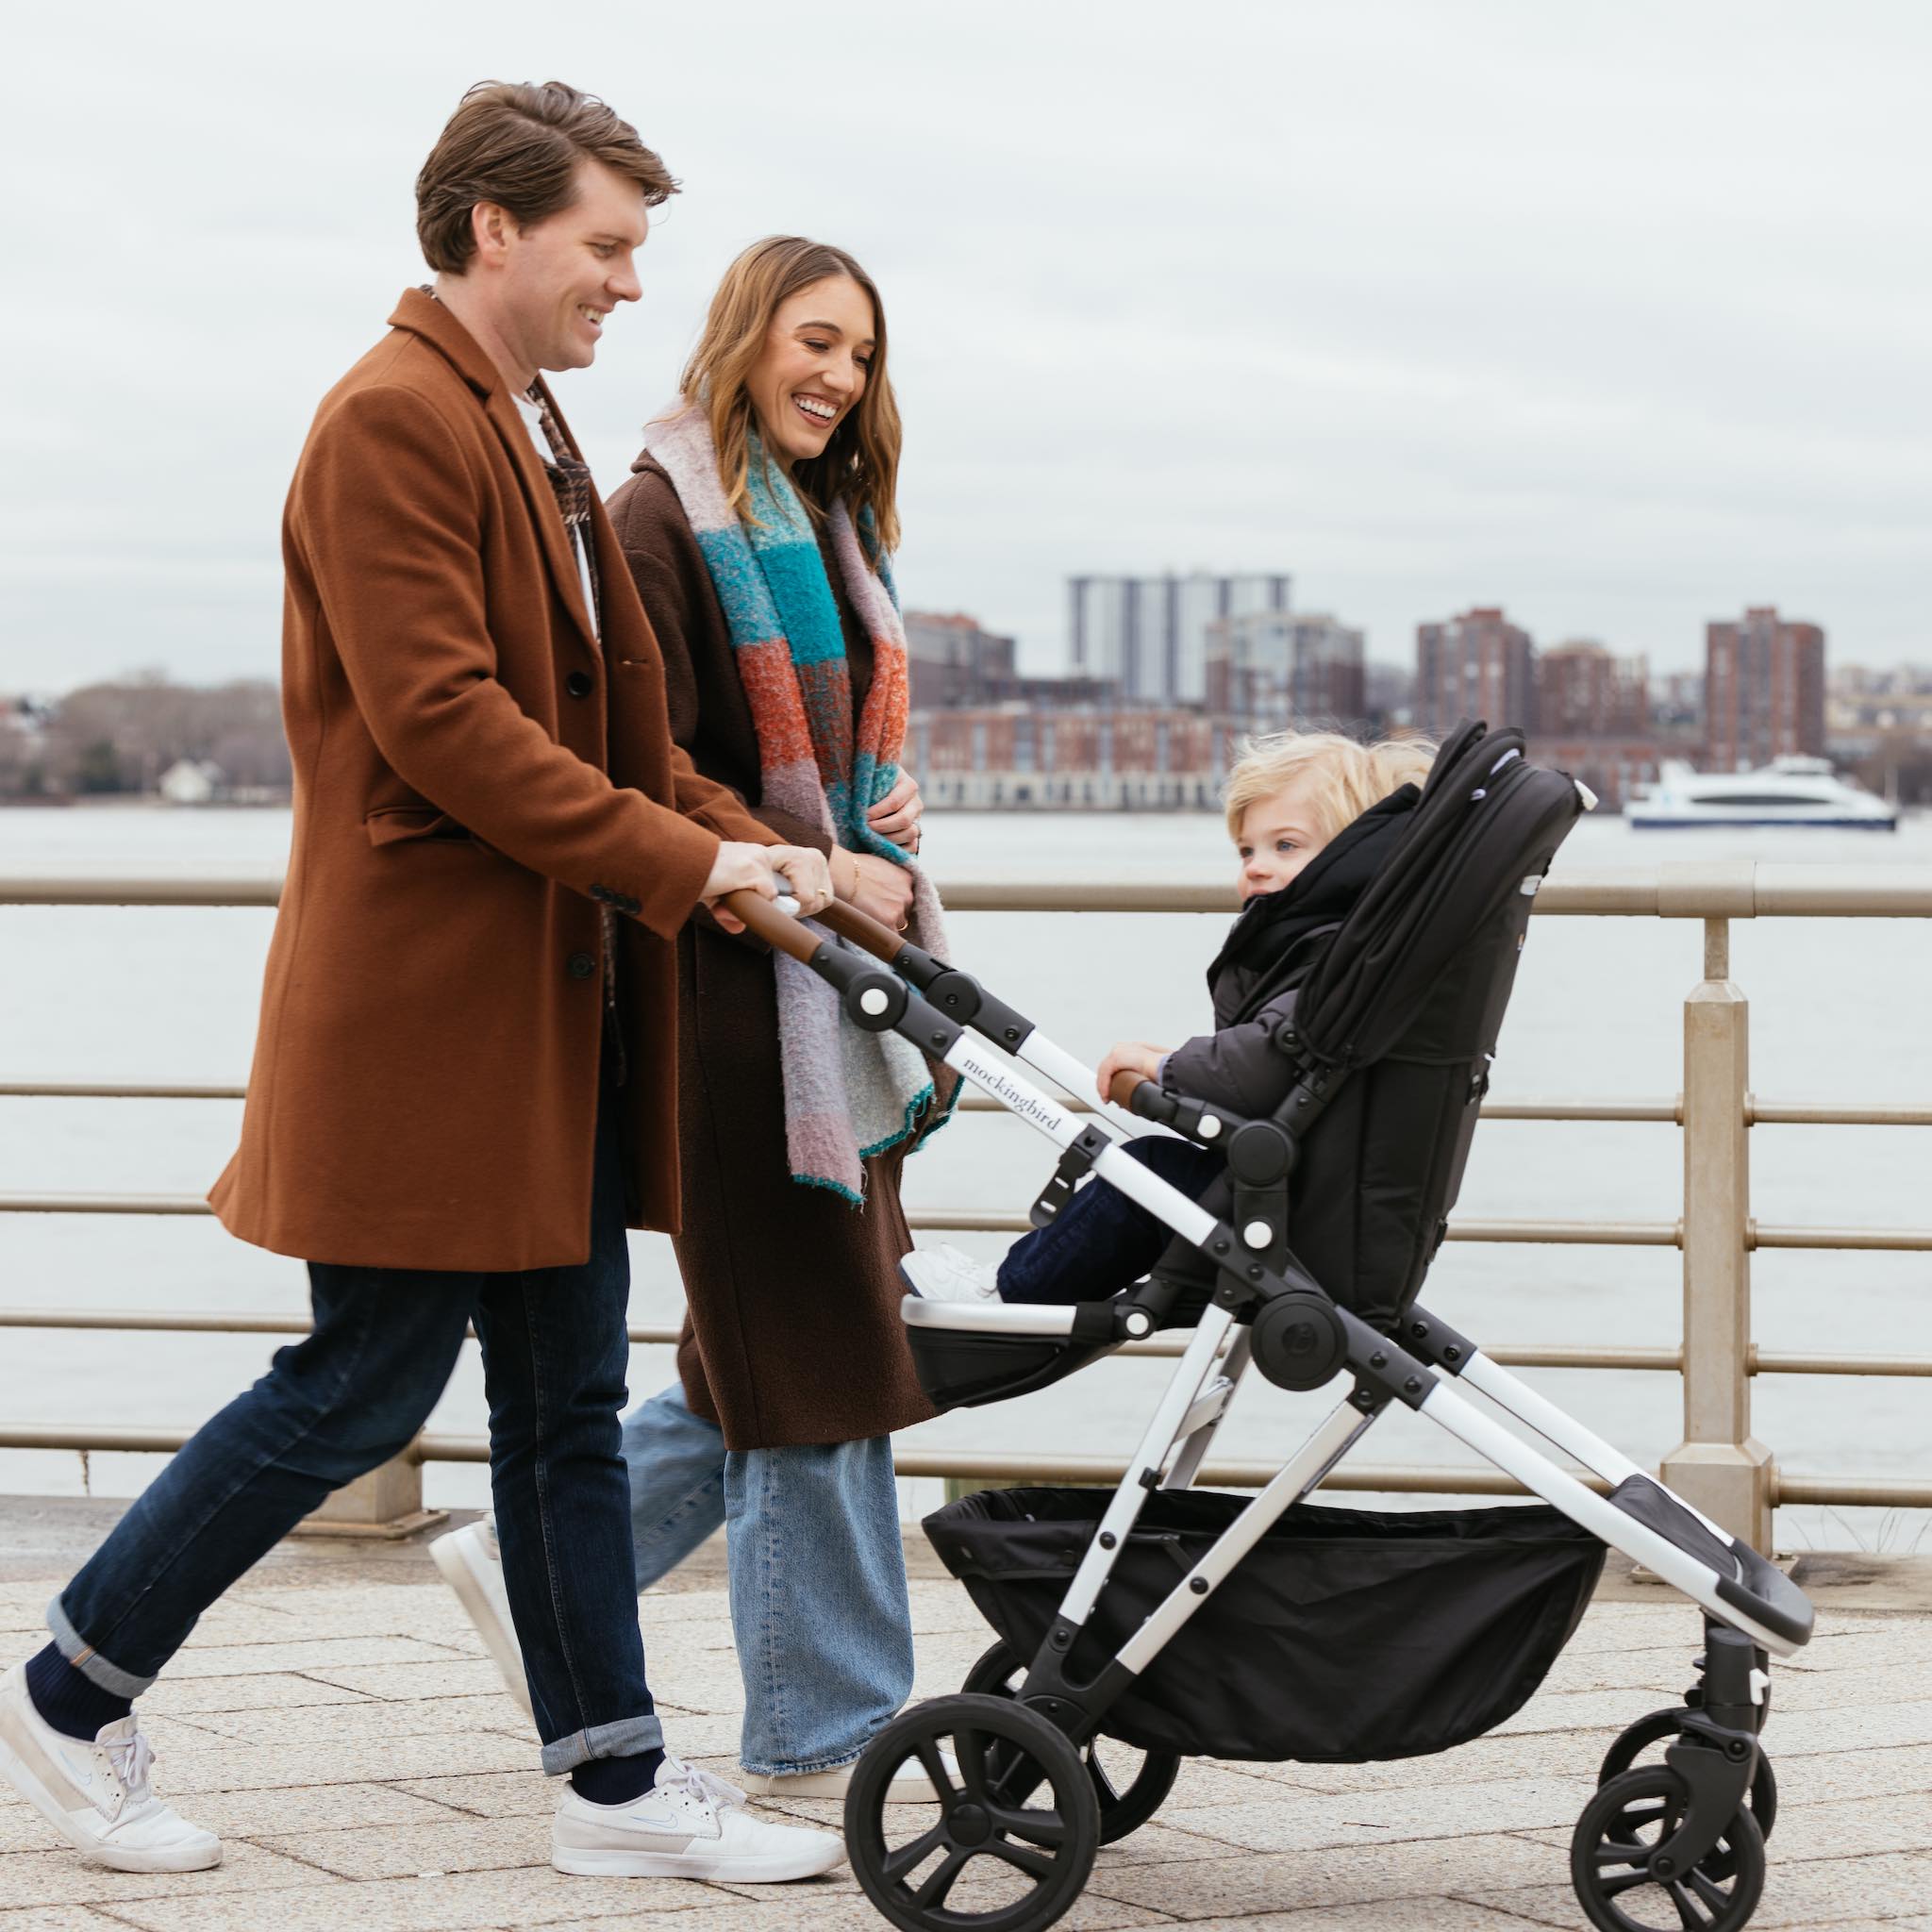 A couple walking with their young child in a stroller by a waterfront promenade, smiling and holding hands.